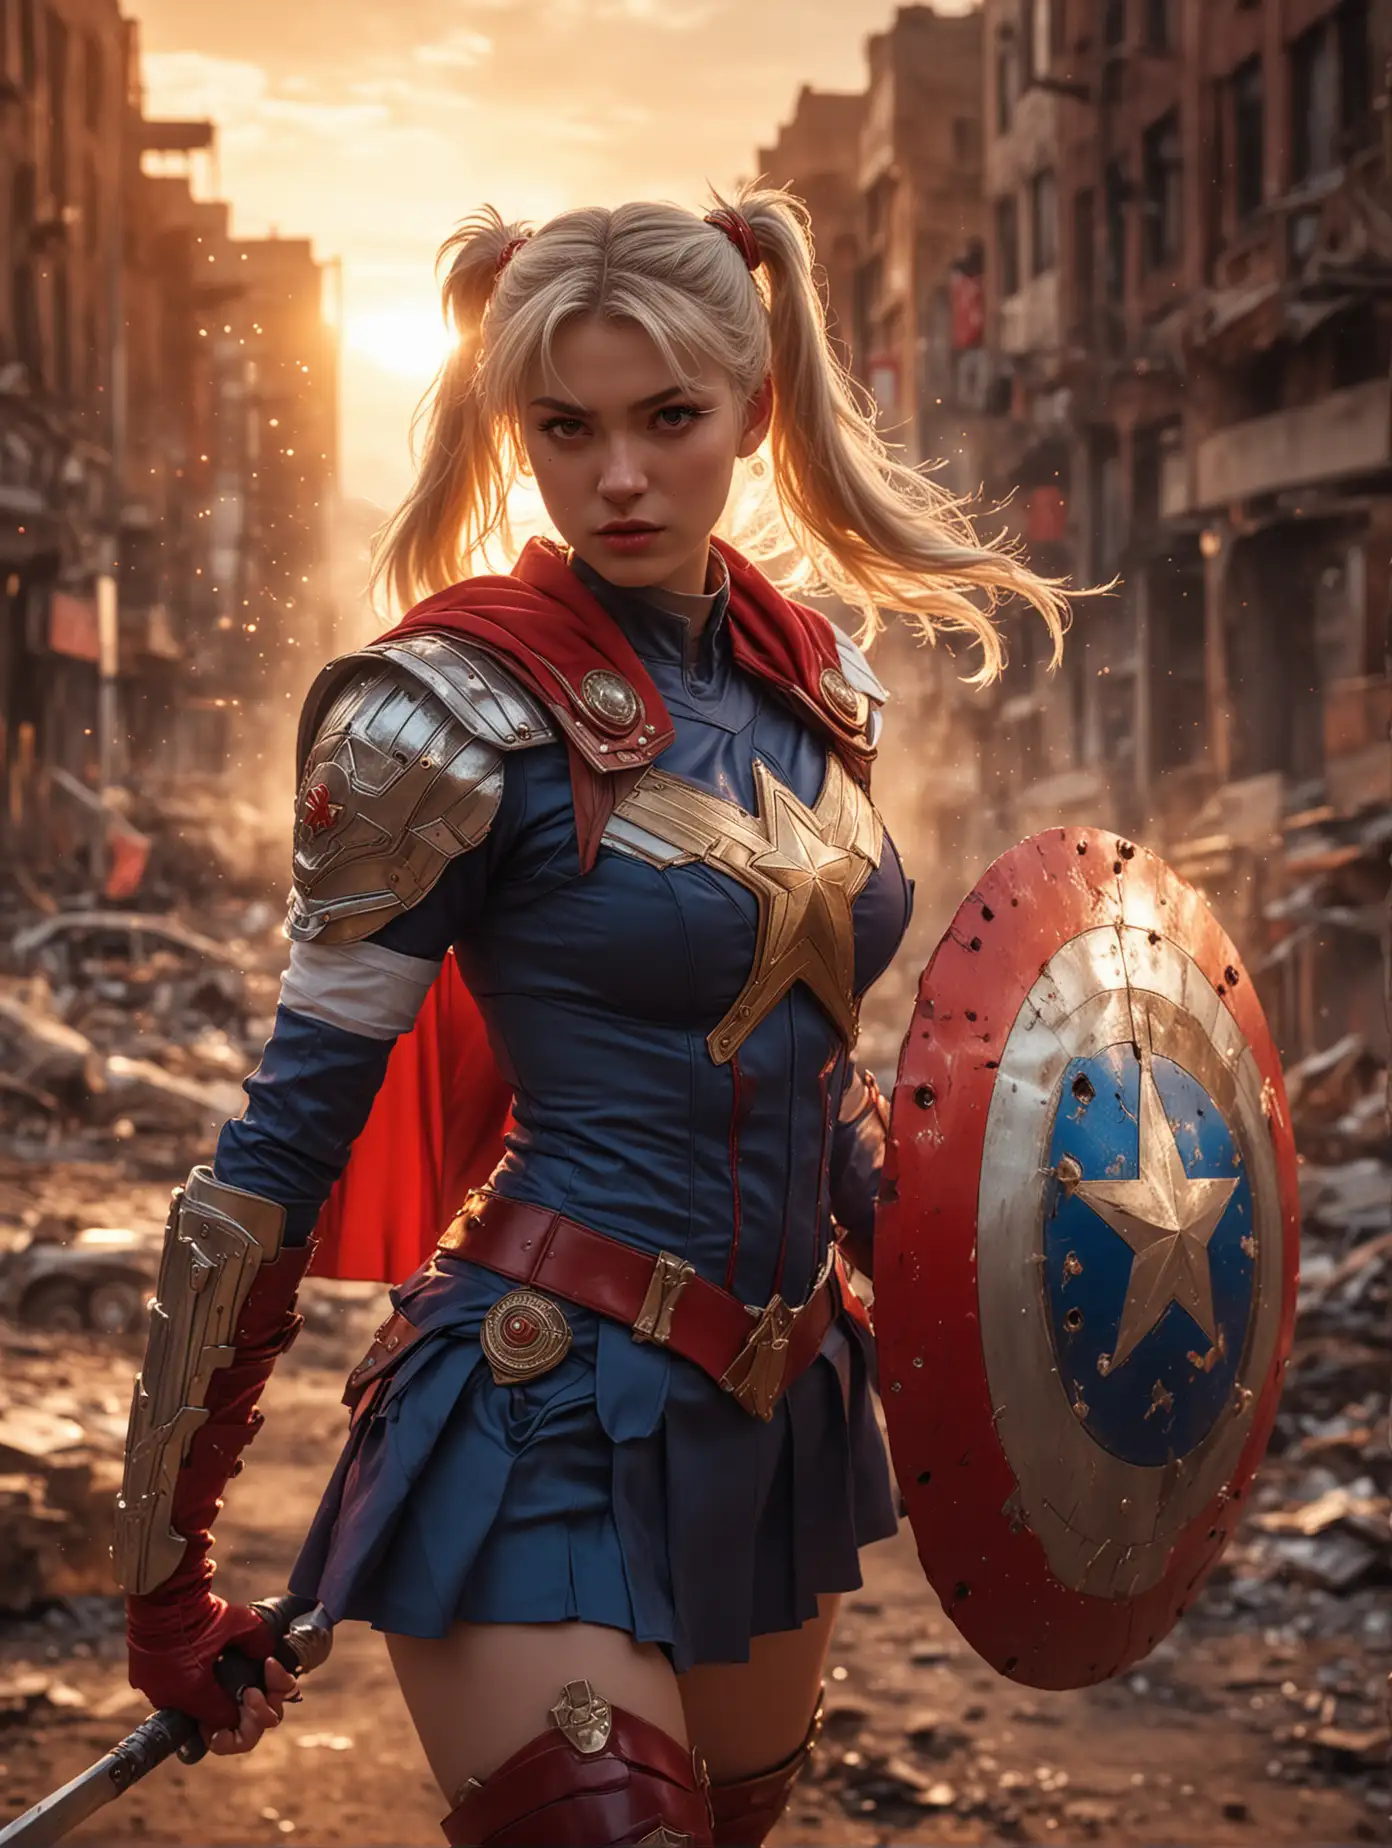 A masterful and striking conceptual art potrait, close up portrait, close up shot, showcasing beauty Sailormoon was cosplaying as Captain America, holding a sword and shield, walking graceful and elegant with moody face, deeply immersed in the chaotic energy of a war Zone with explosions everywhere. Dynamic martial action pose at wasteland cityscape background with amazing ray tracing of sunset light.